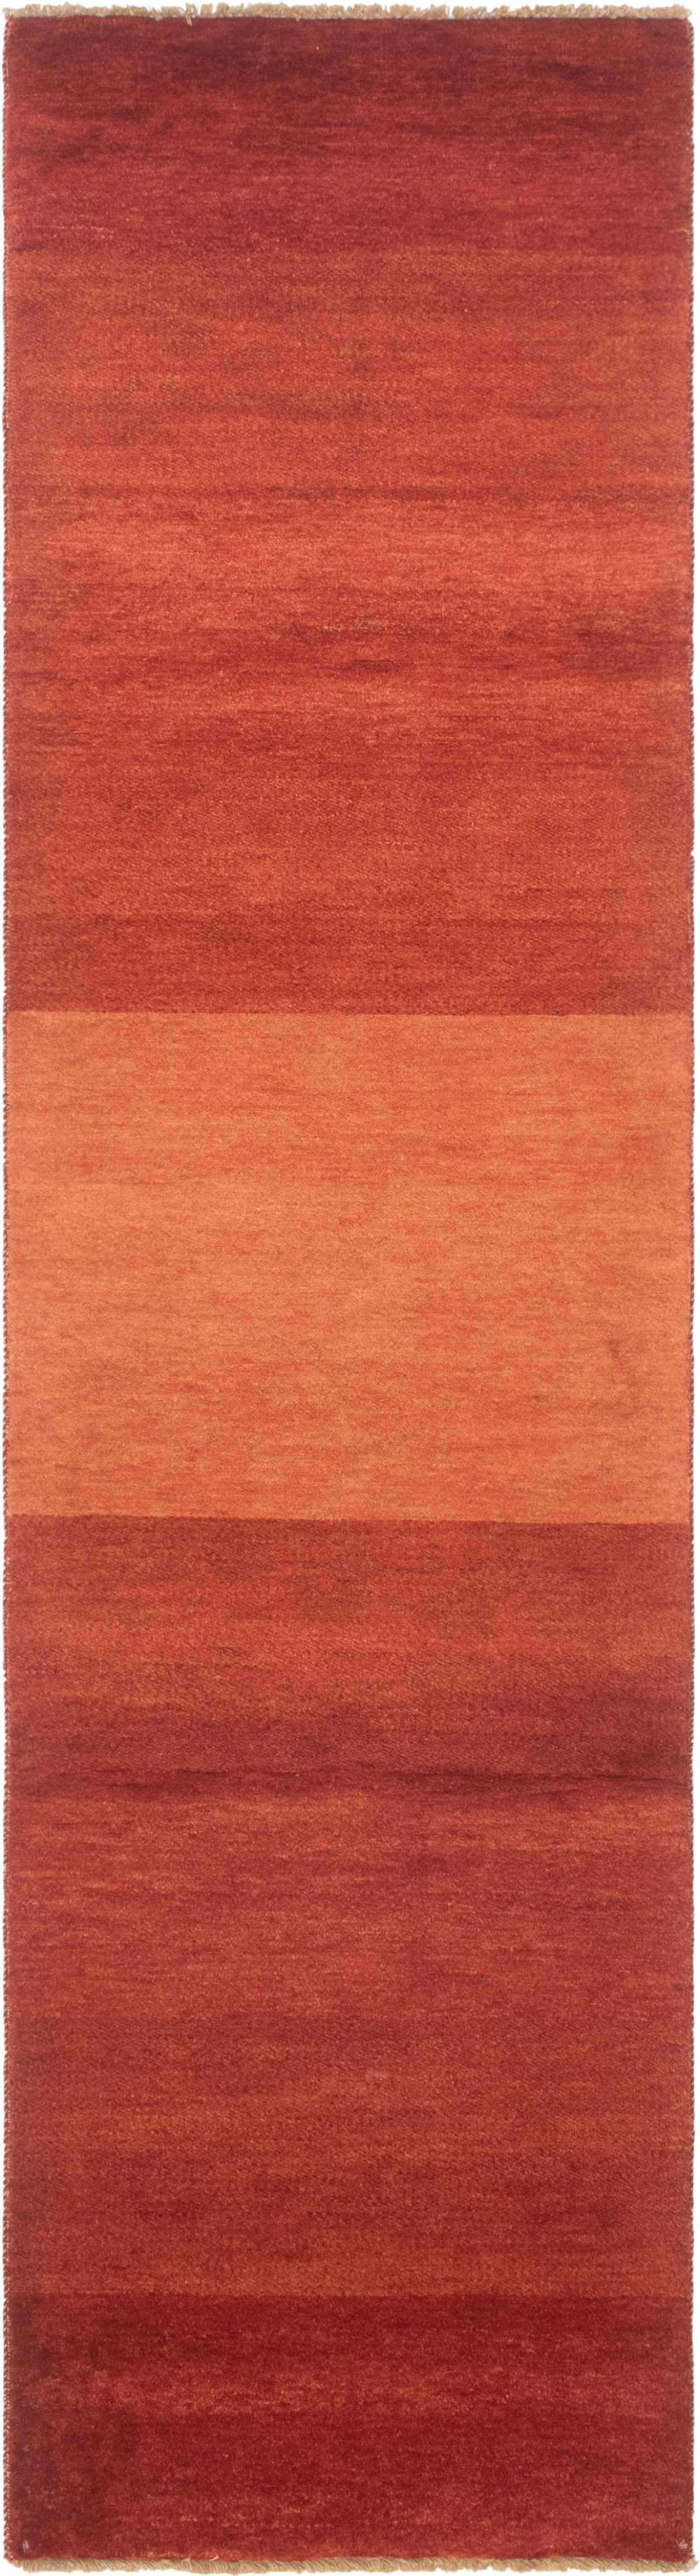 Hand-knotted Finest Ziegler Chobi Copper Wool Rug 2'7" x 10'2" Size: 2'7" x 10'2"  